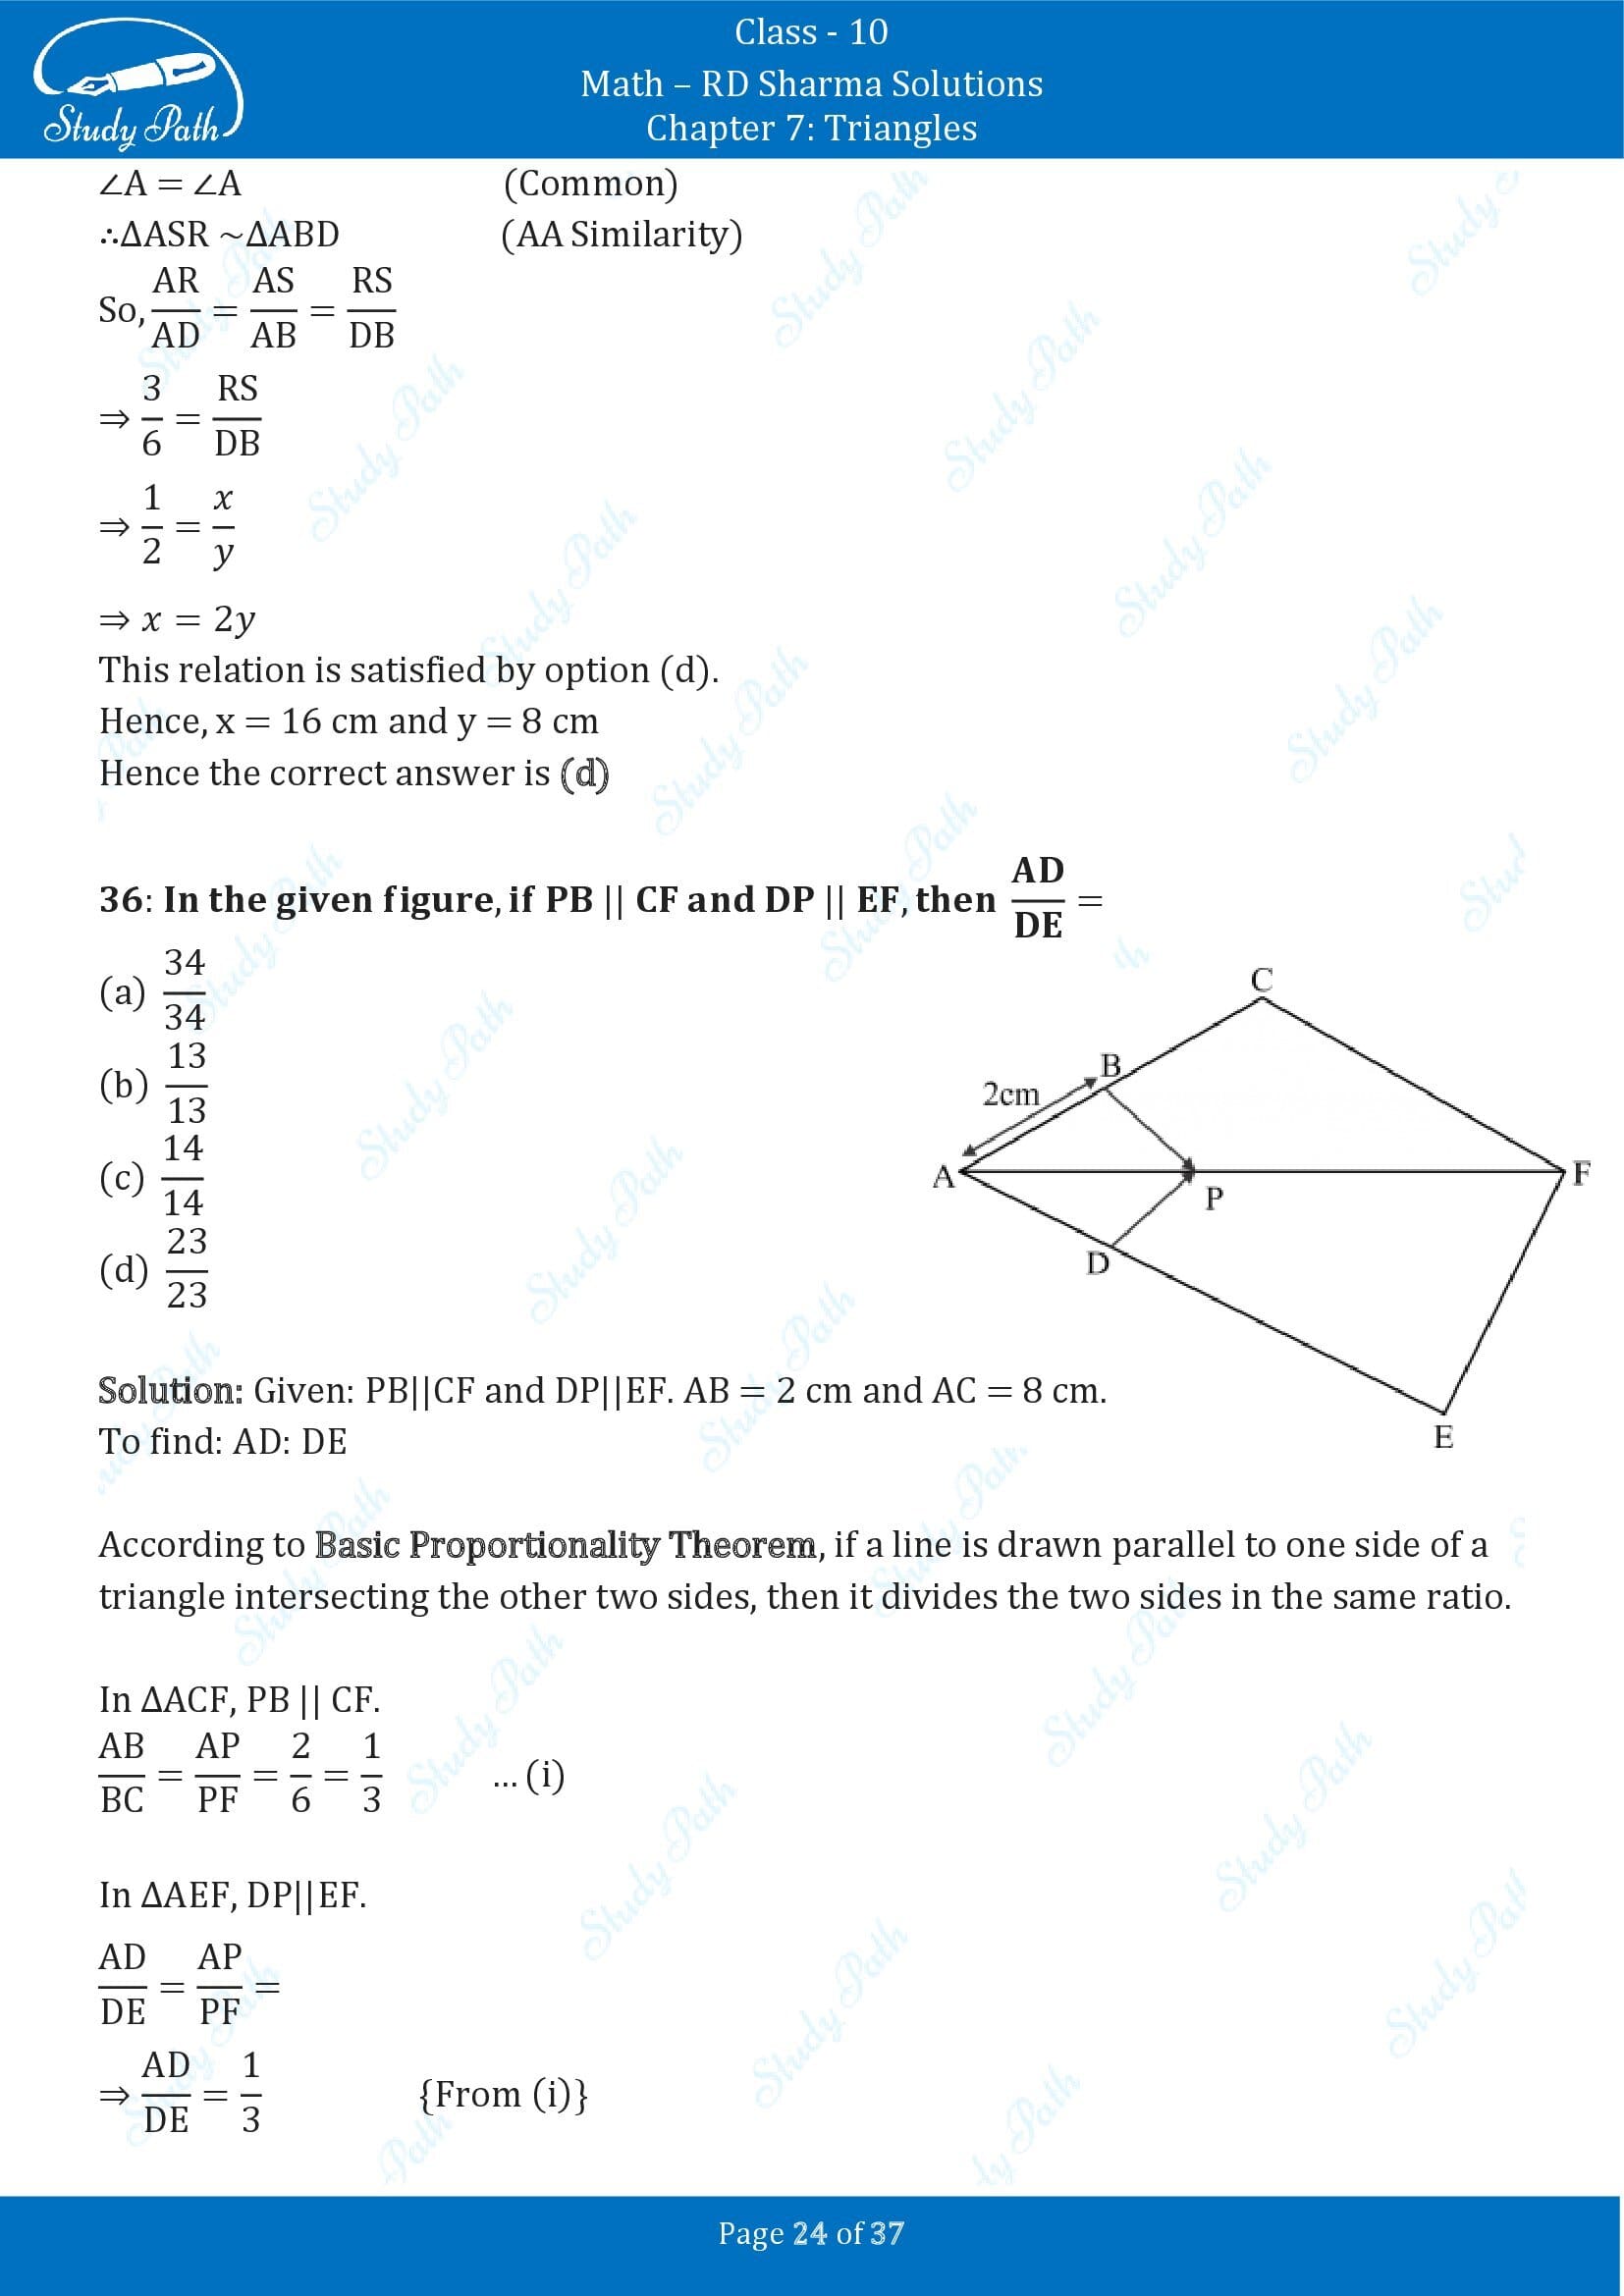 RD Sharma Solutions Class 10 Chapter 7 Triangles Multiple Choice Question MCQs 00024